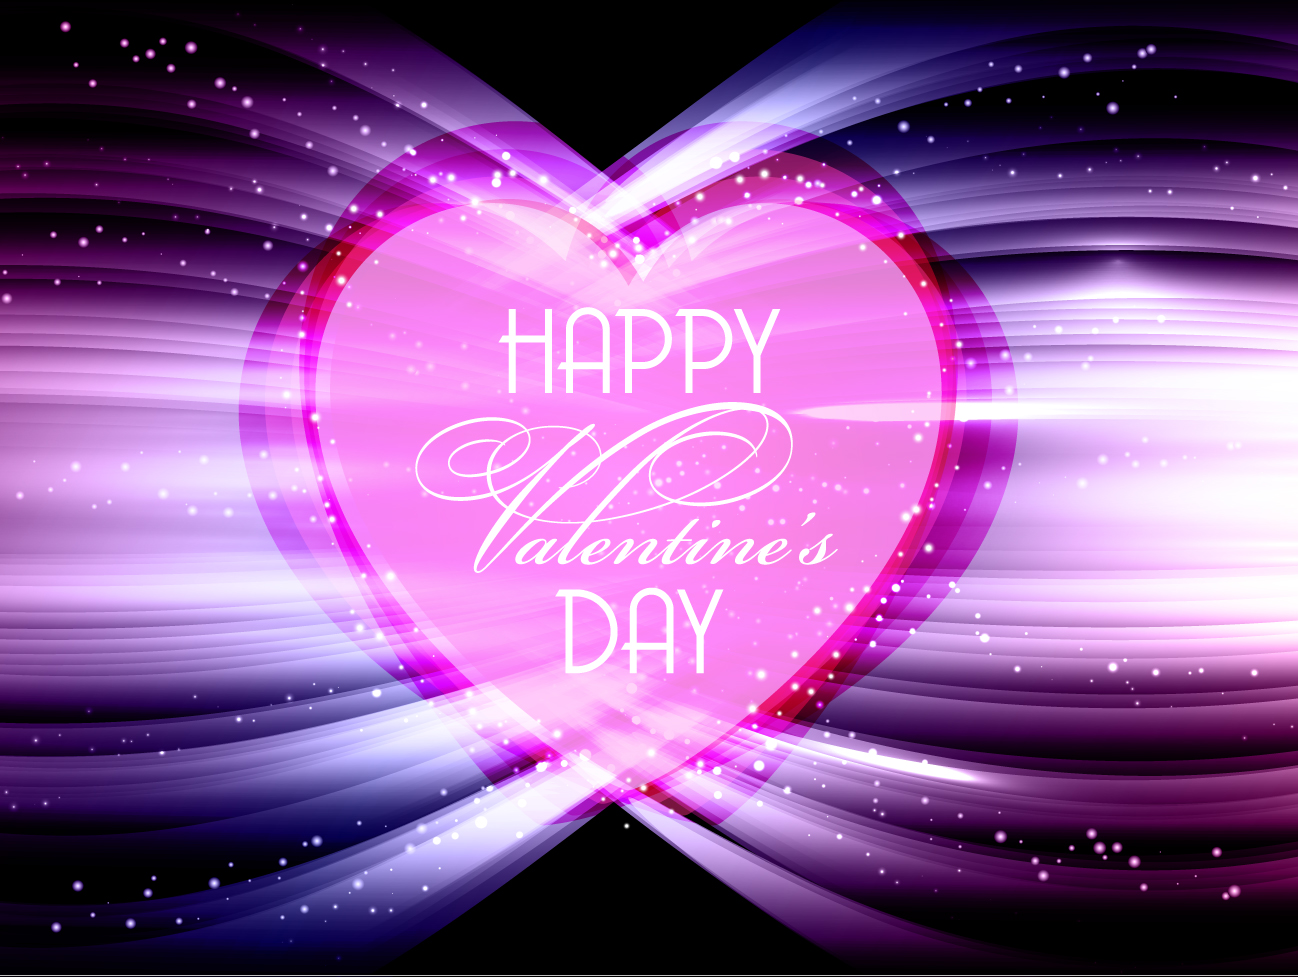 50+ Cute Valentines Day Pictures in HD 2016 - Hug2Love